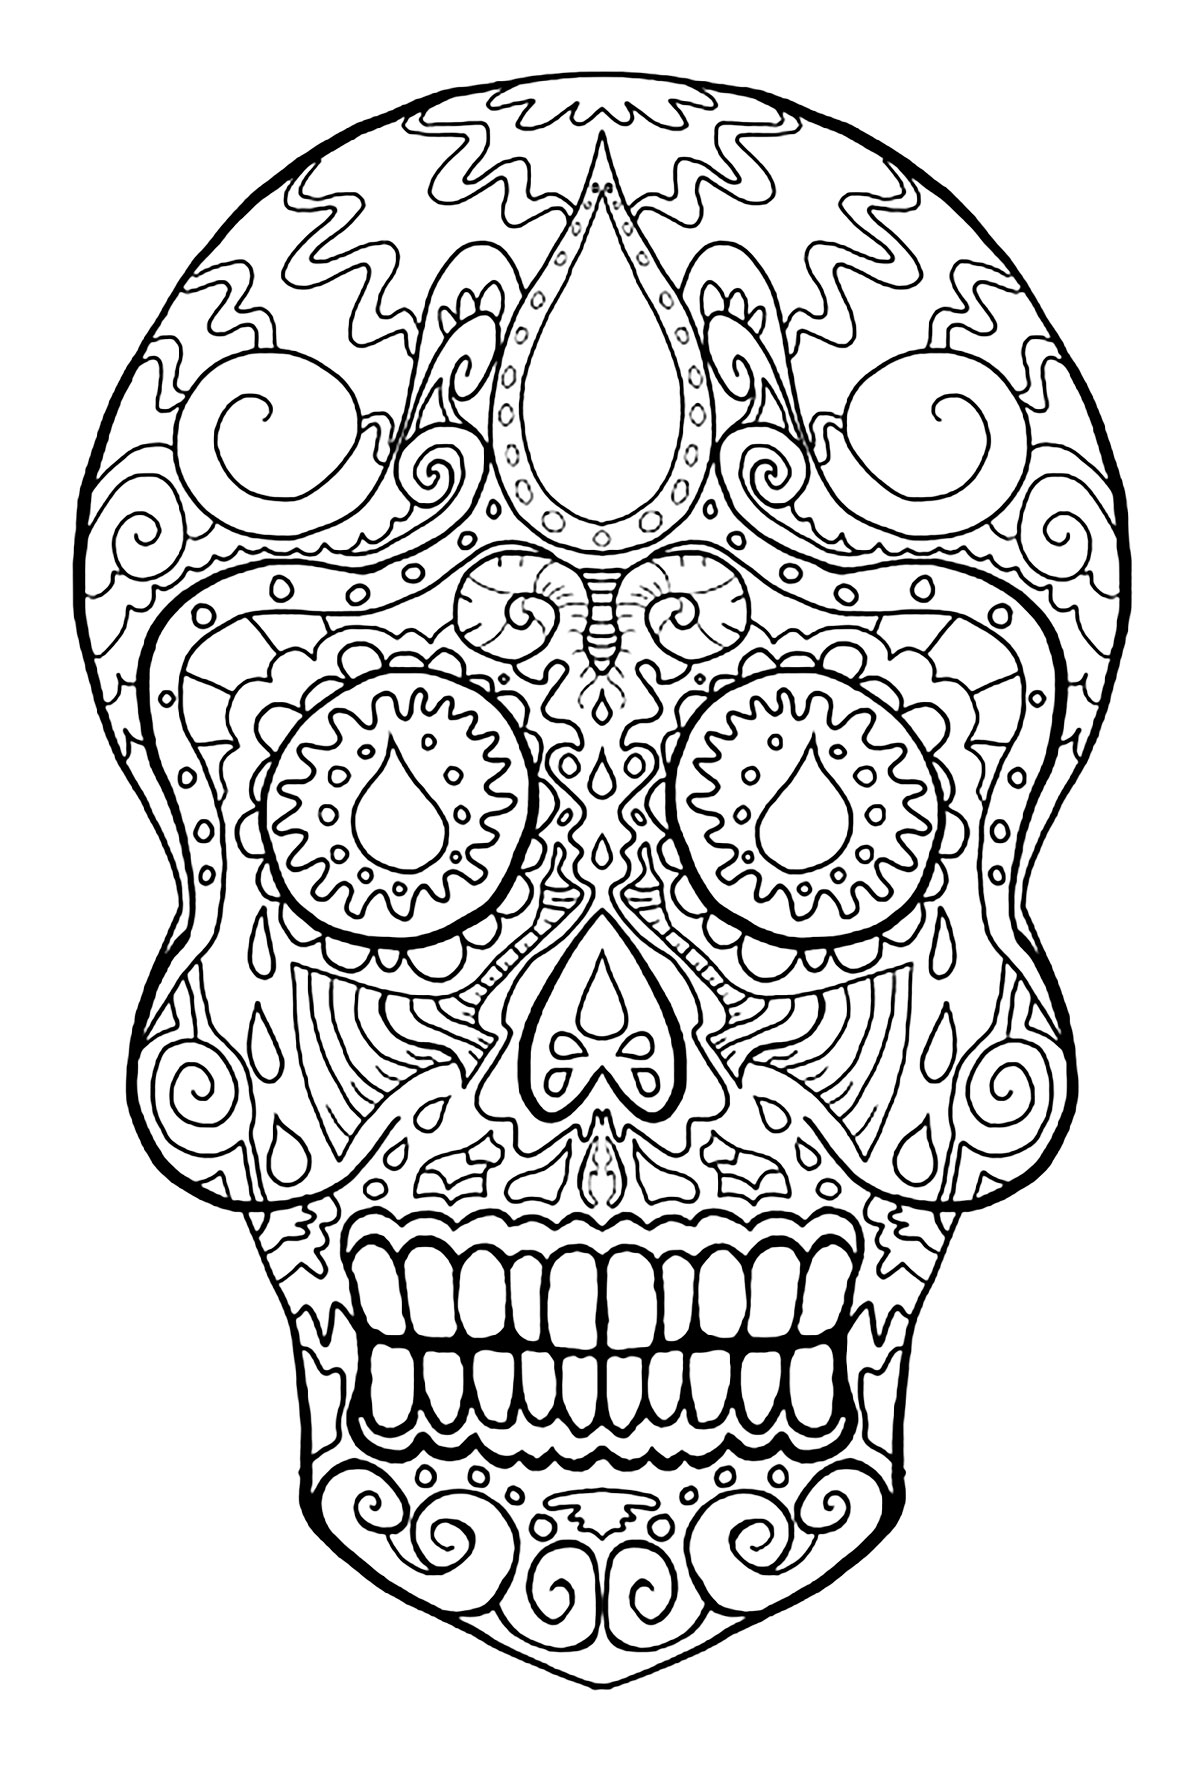 Skull Coloring Pages For Adults